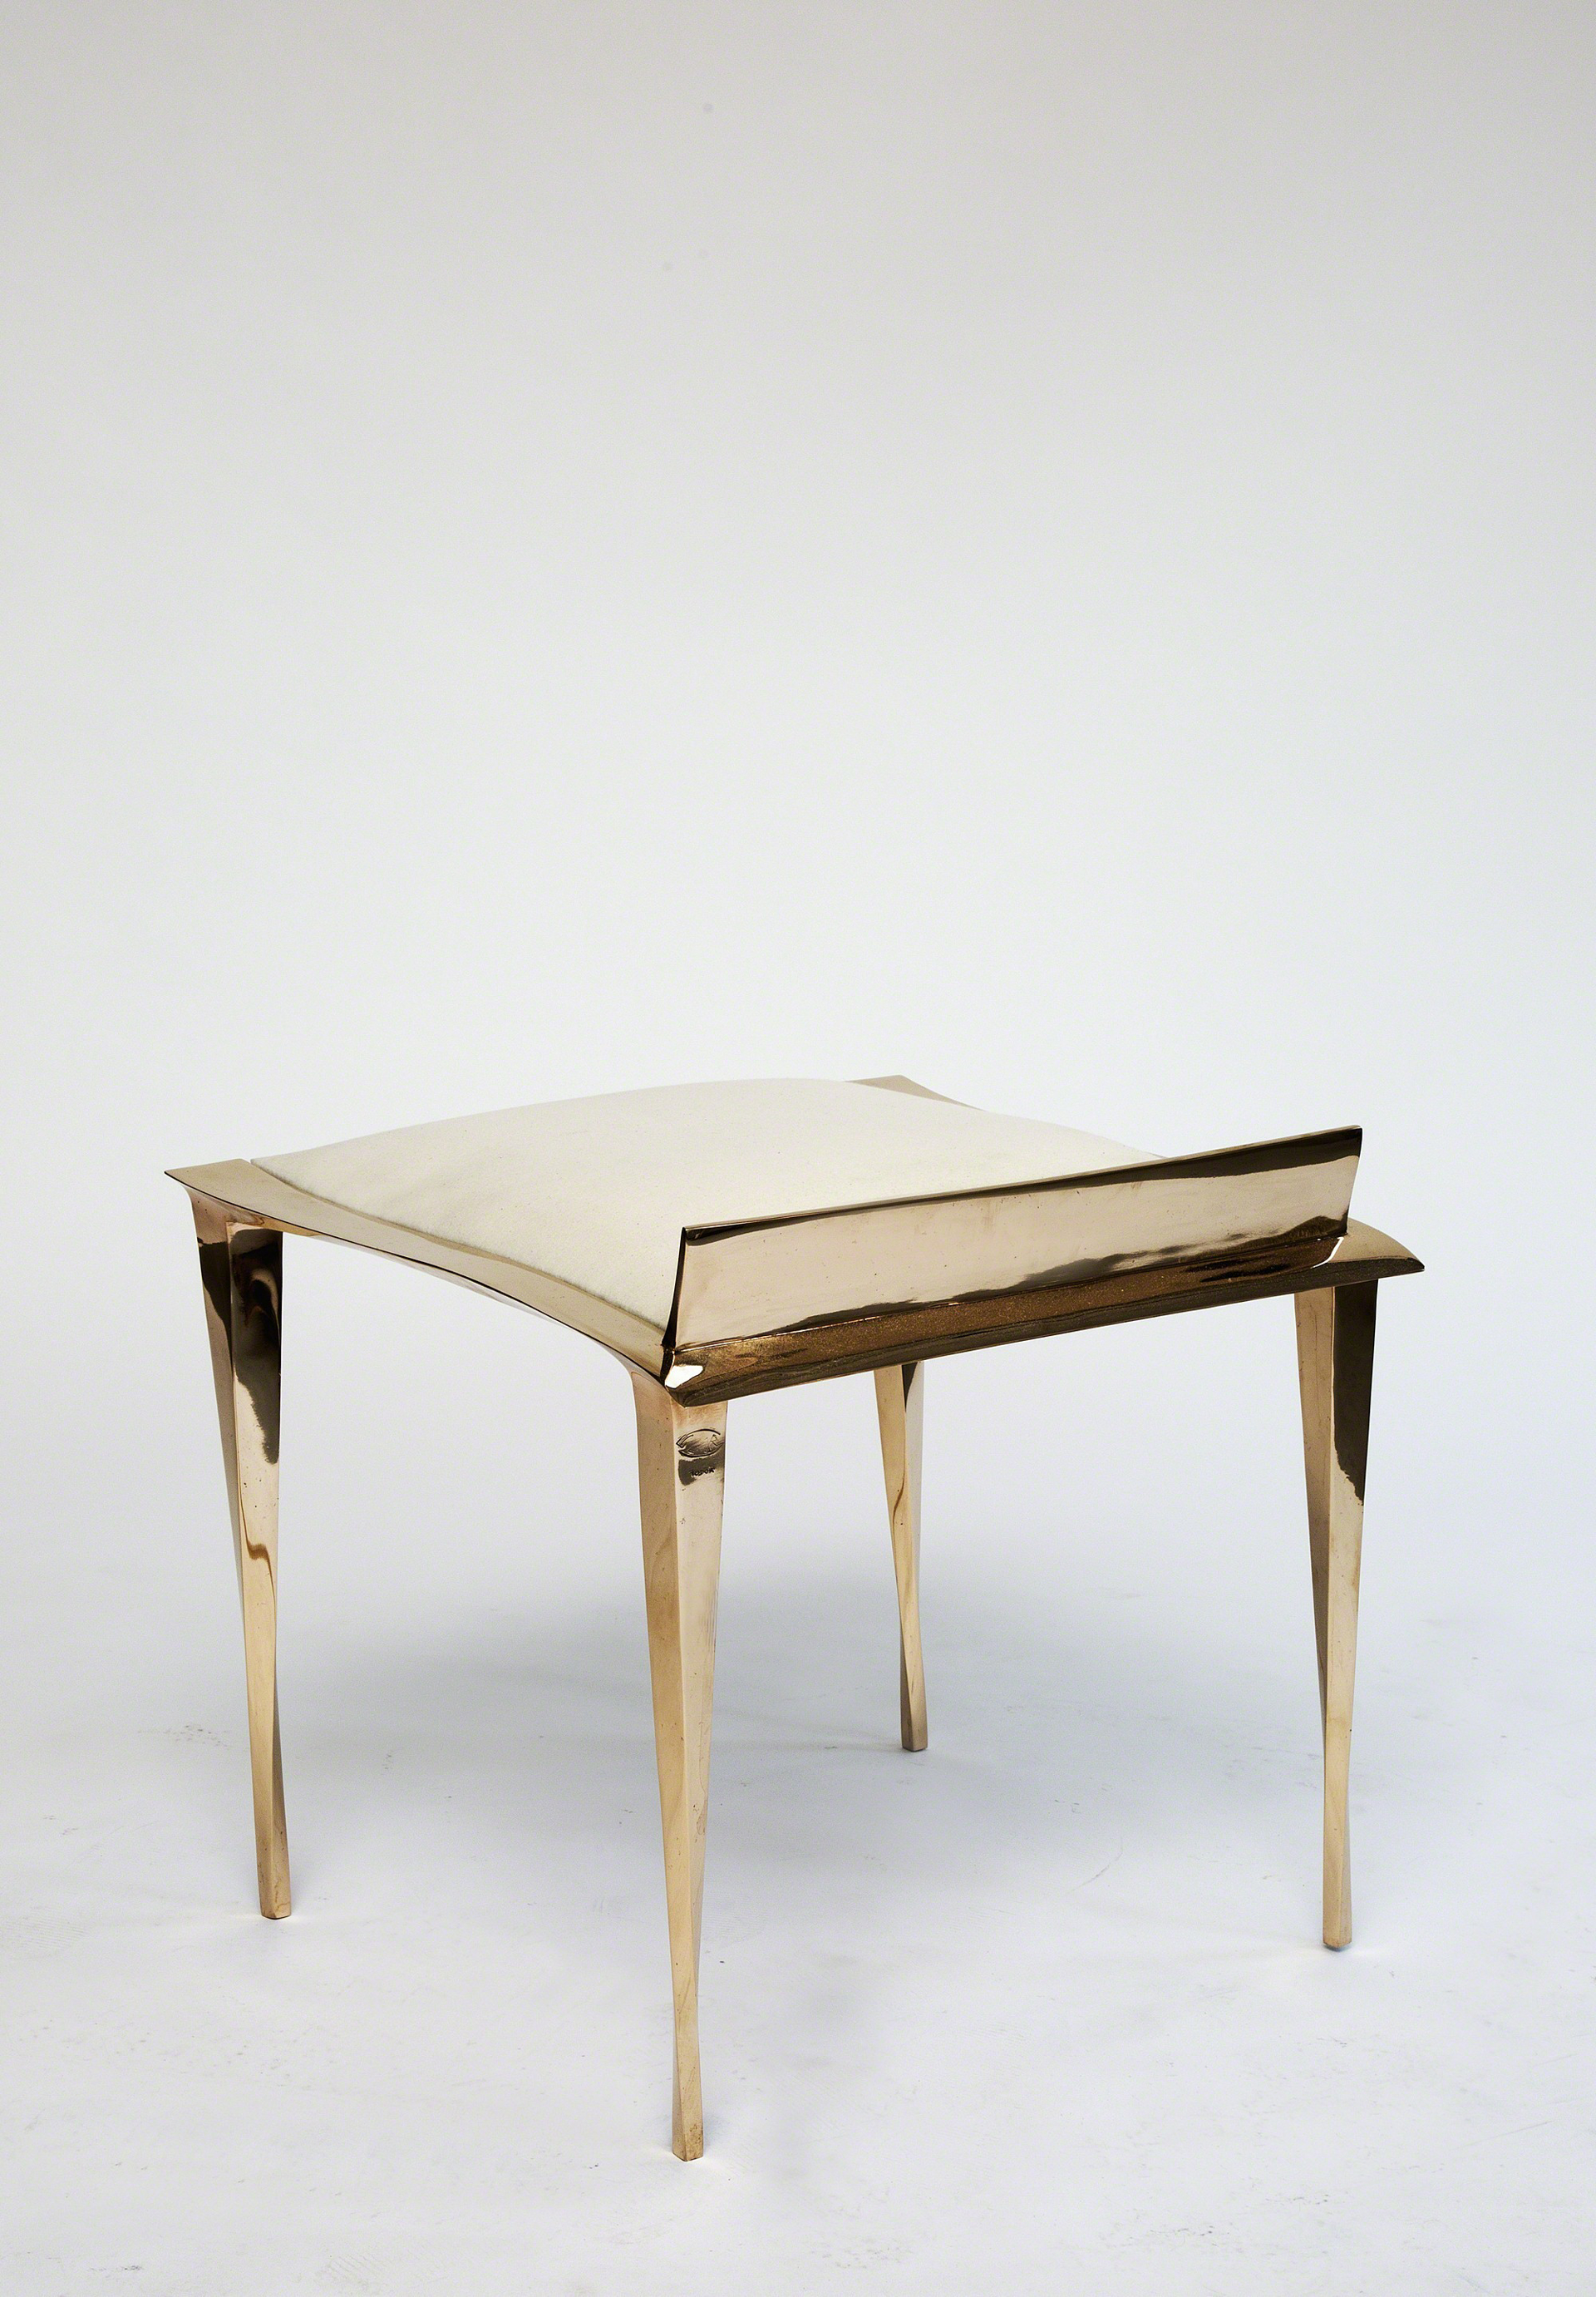 Bronze stool by Anasthasia Millot